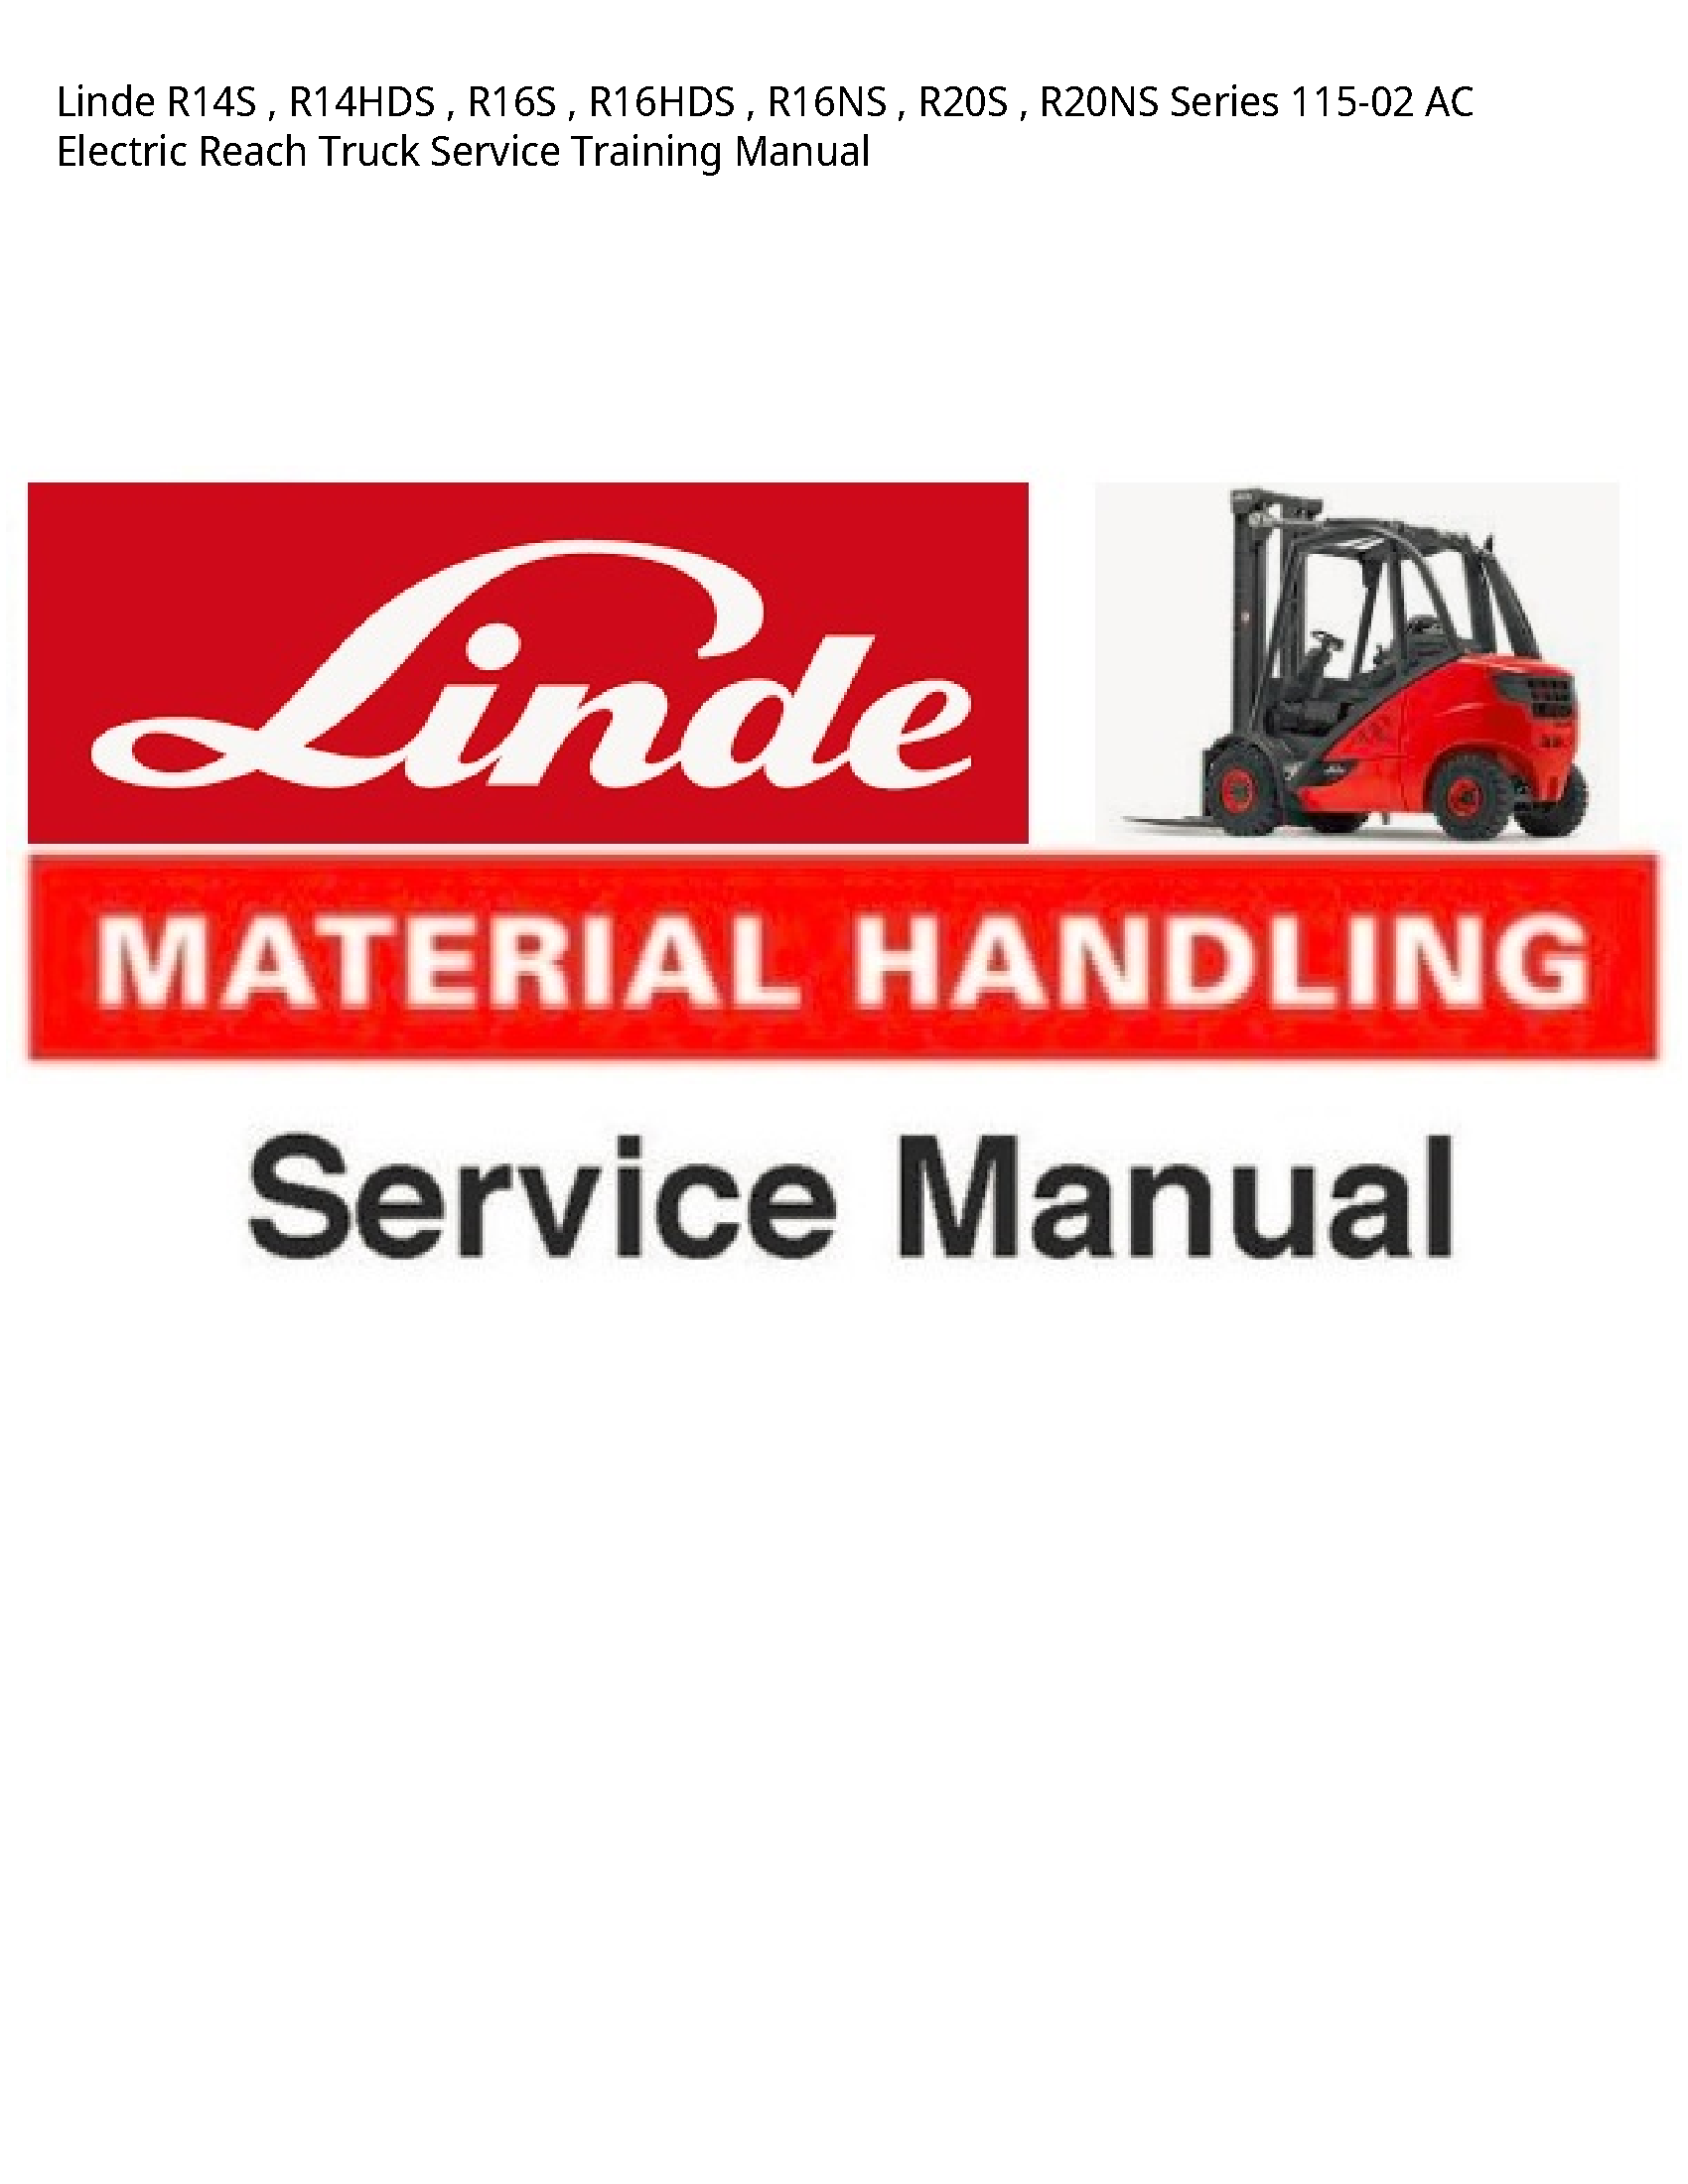 Linde R14S Series AC Electric Reach Truck Service Training manual